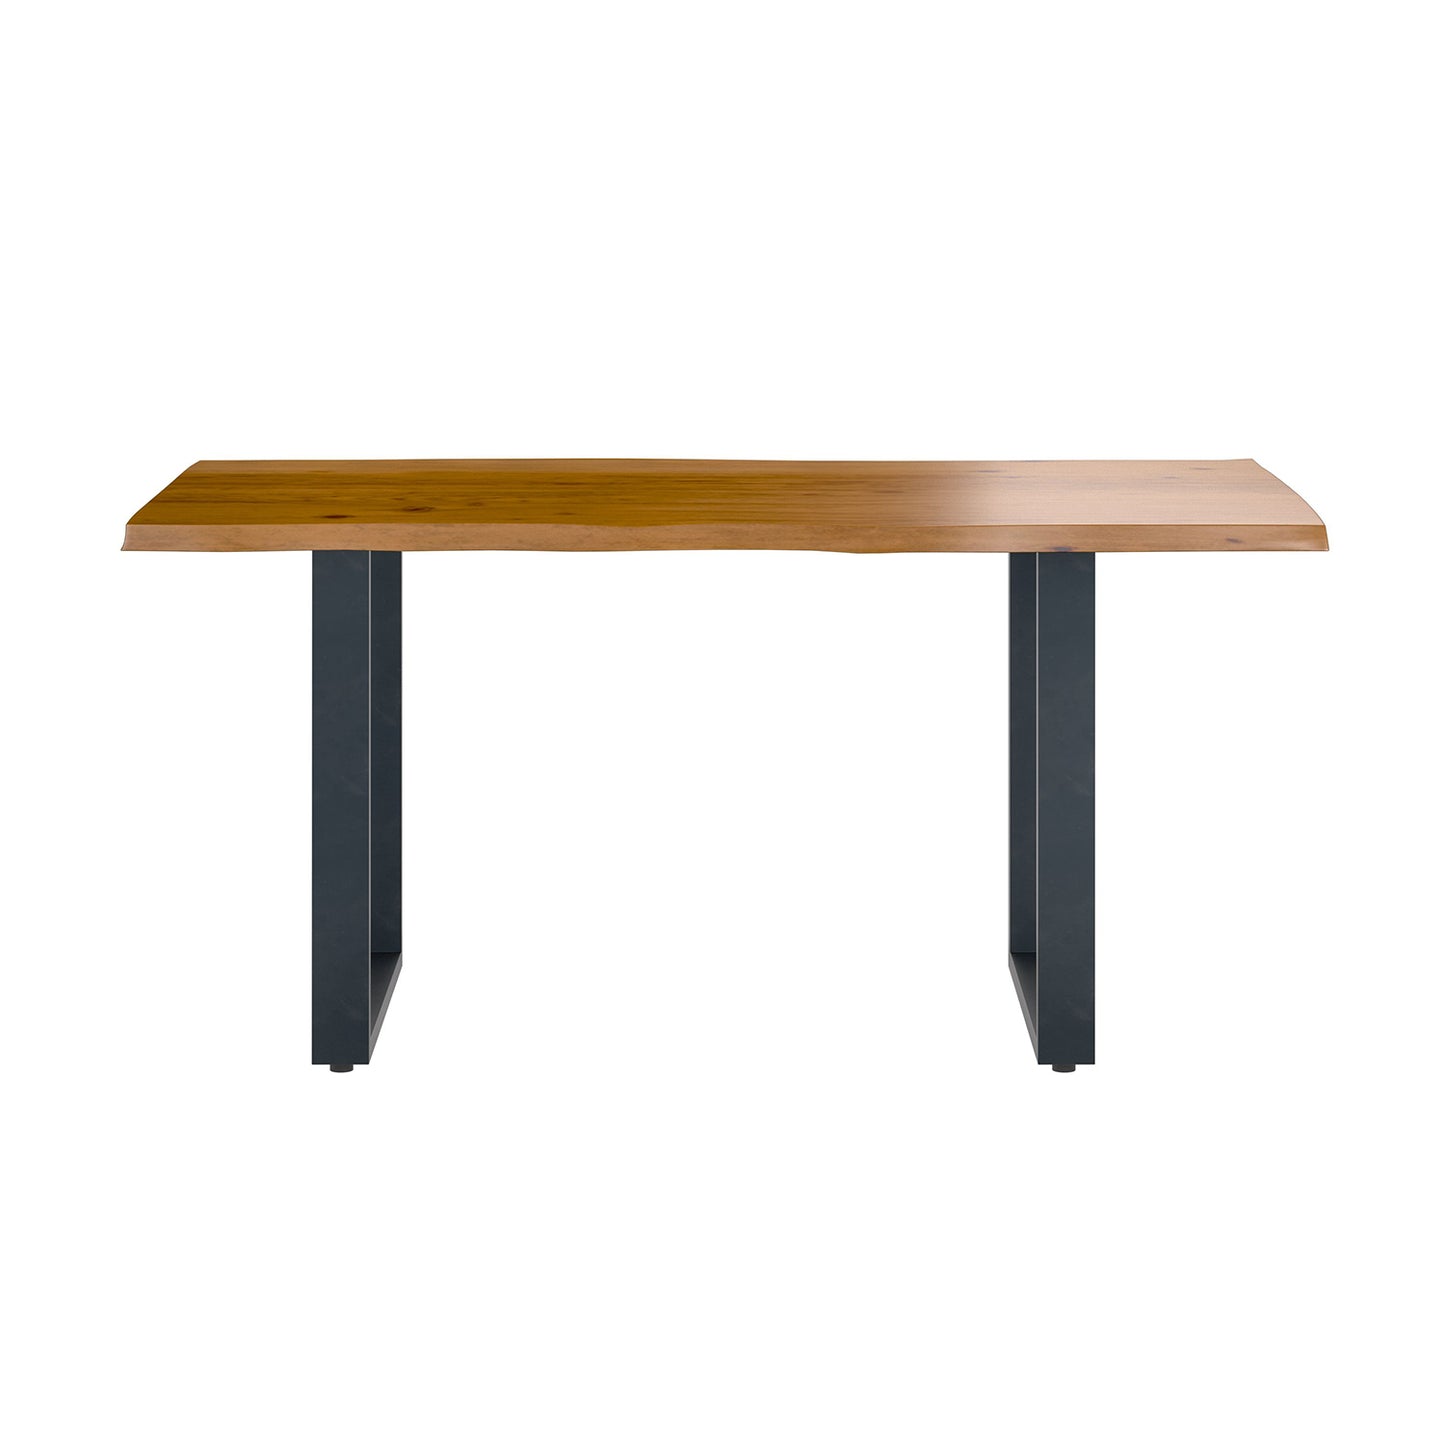 Hoxton Dining Table - With Russet Top & U Shaped Legs - 1.6m